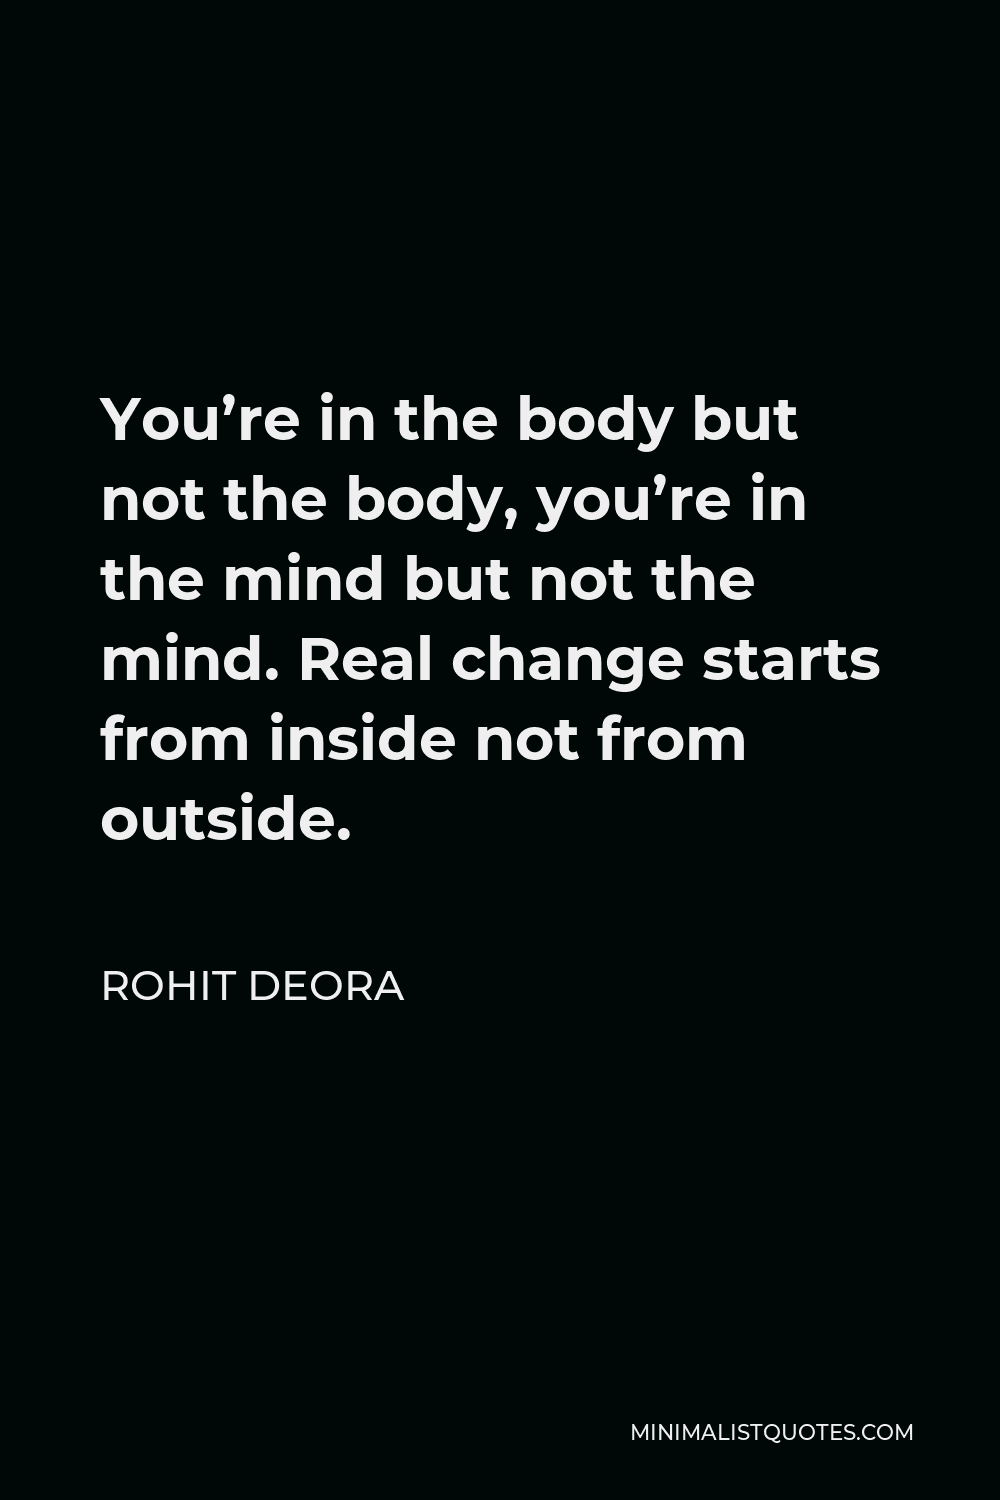 Rohit Deora Quote - You’re in the body but not the body, you’re in the mind but not the mind. Real change starts from inside not from outside.